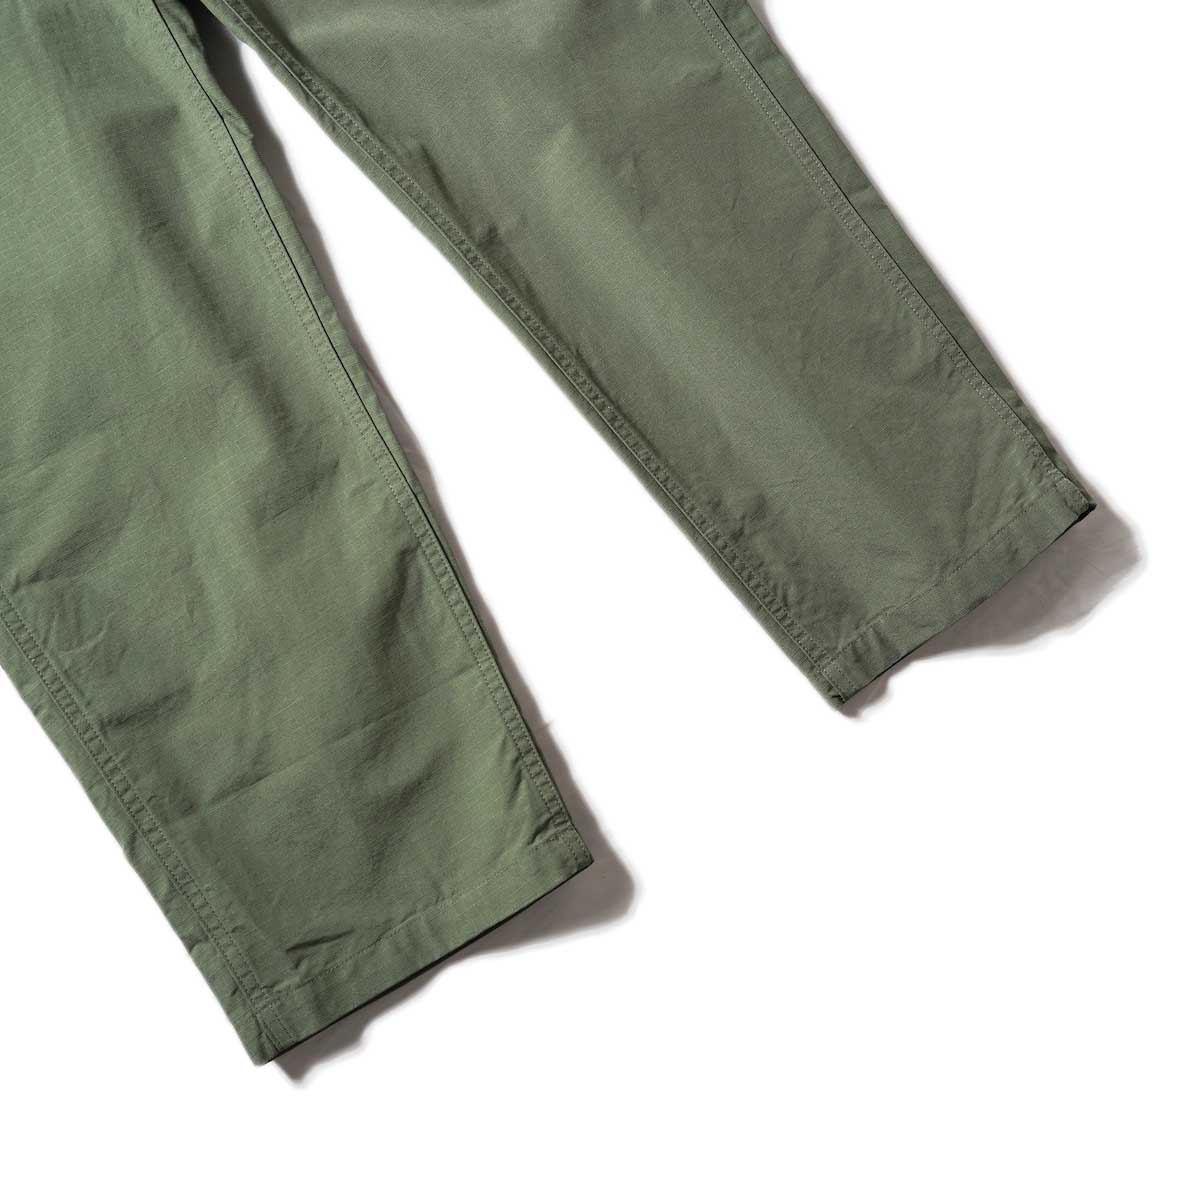 ENGINEERED GARMENTS / FATIGUE PANTS - Cotton Ripstop (Olive)裾